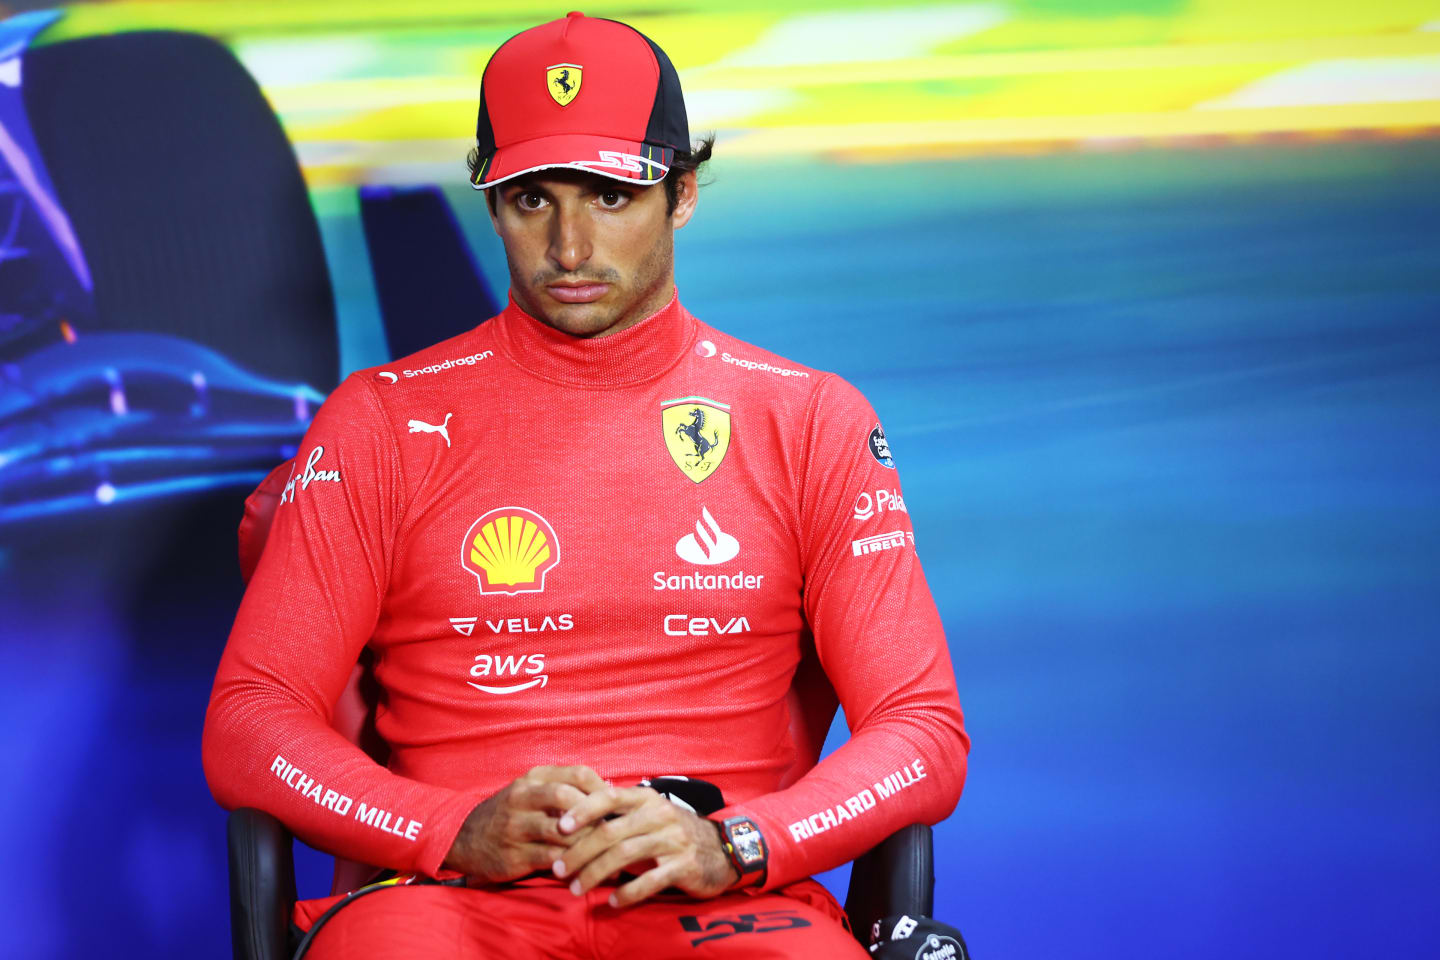 SAO PAULO, BRAZIL - NOVEMBER 13: Third placed Carlos Sainz of Spain and Ferrari attend the press conference after the F1 Grand Prix of Brazil at Autodromo Jose Carlos Pace on November 13, 2022 in Sao Paulo, Brazil. (Photo by Dan Istitene/Getty Images)